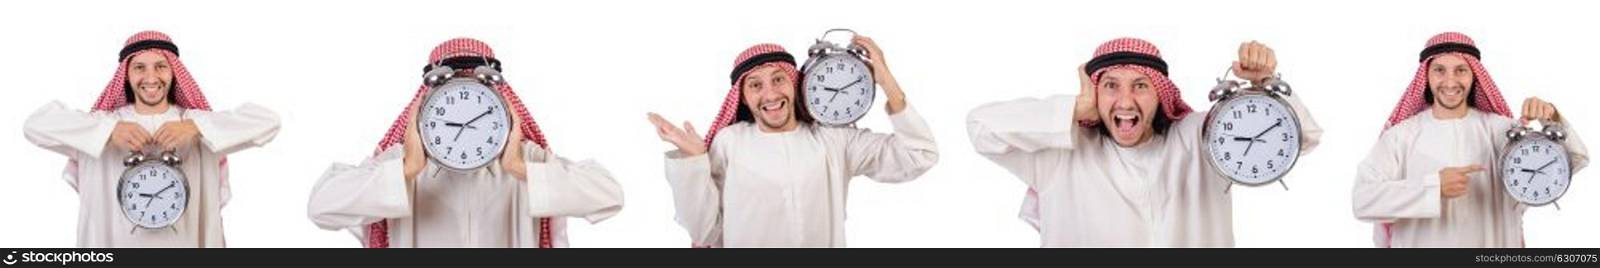 Arab man in time concept on white